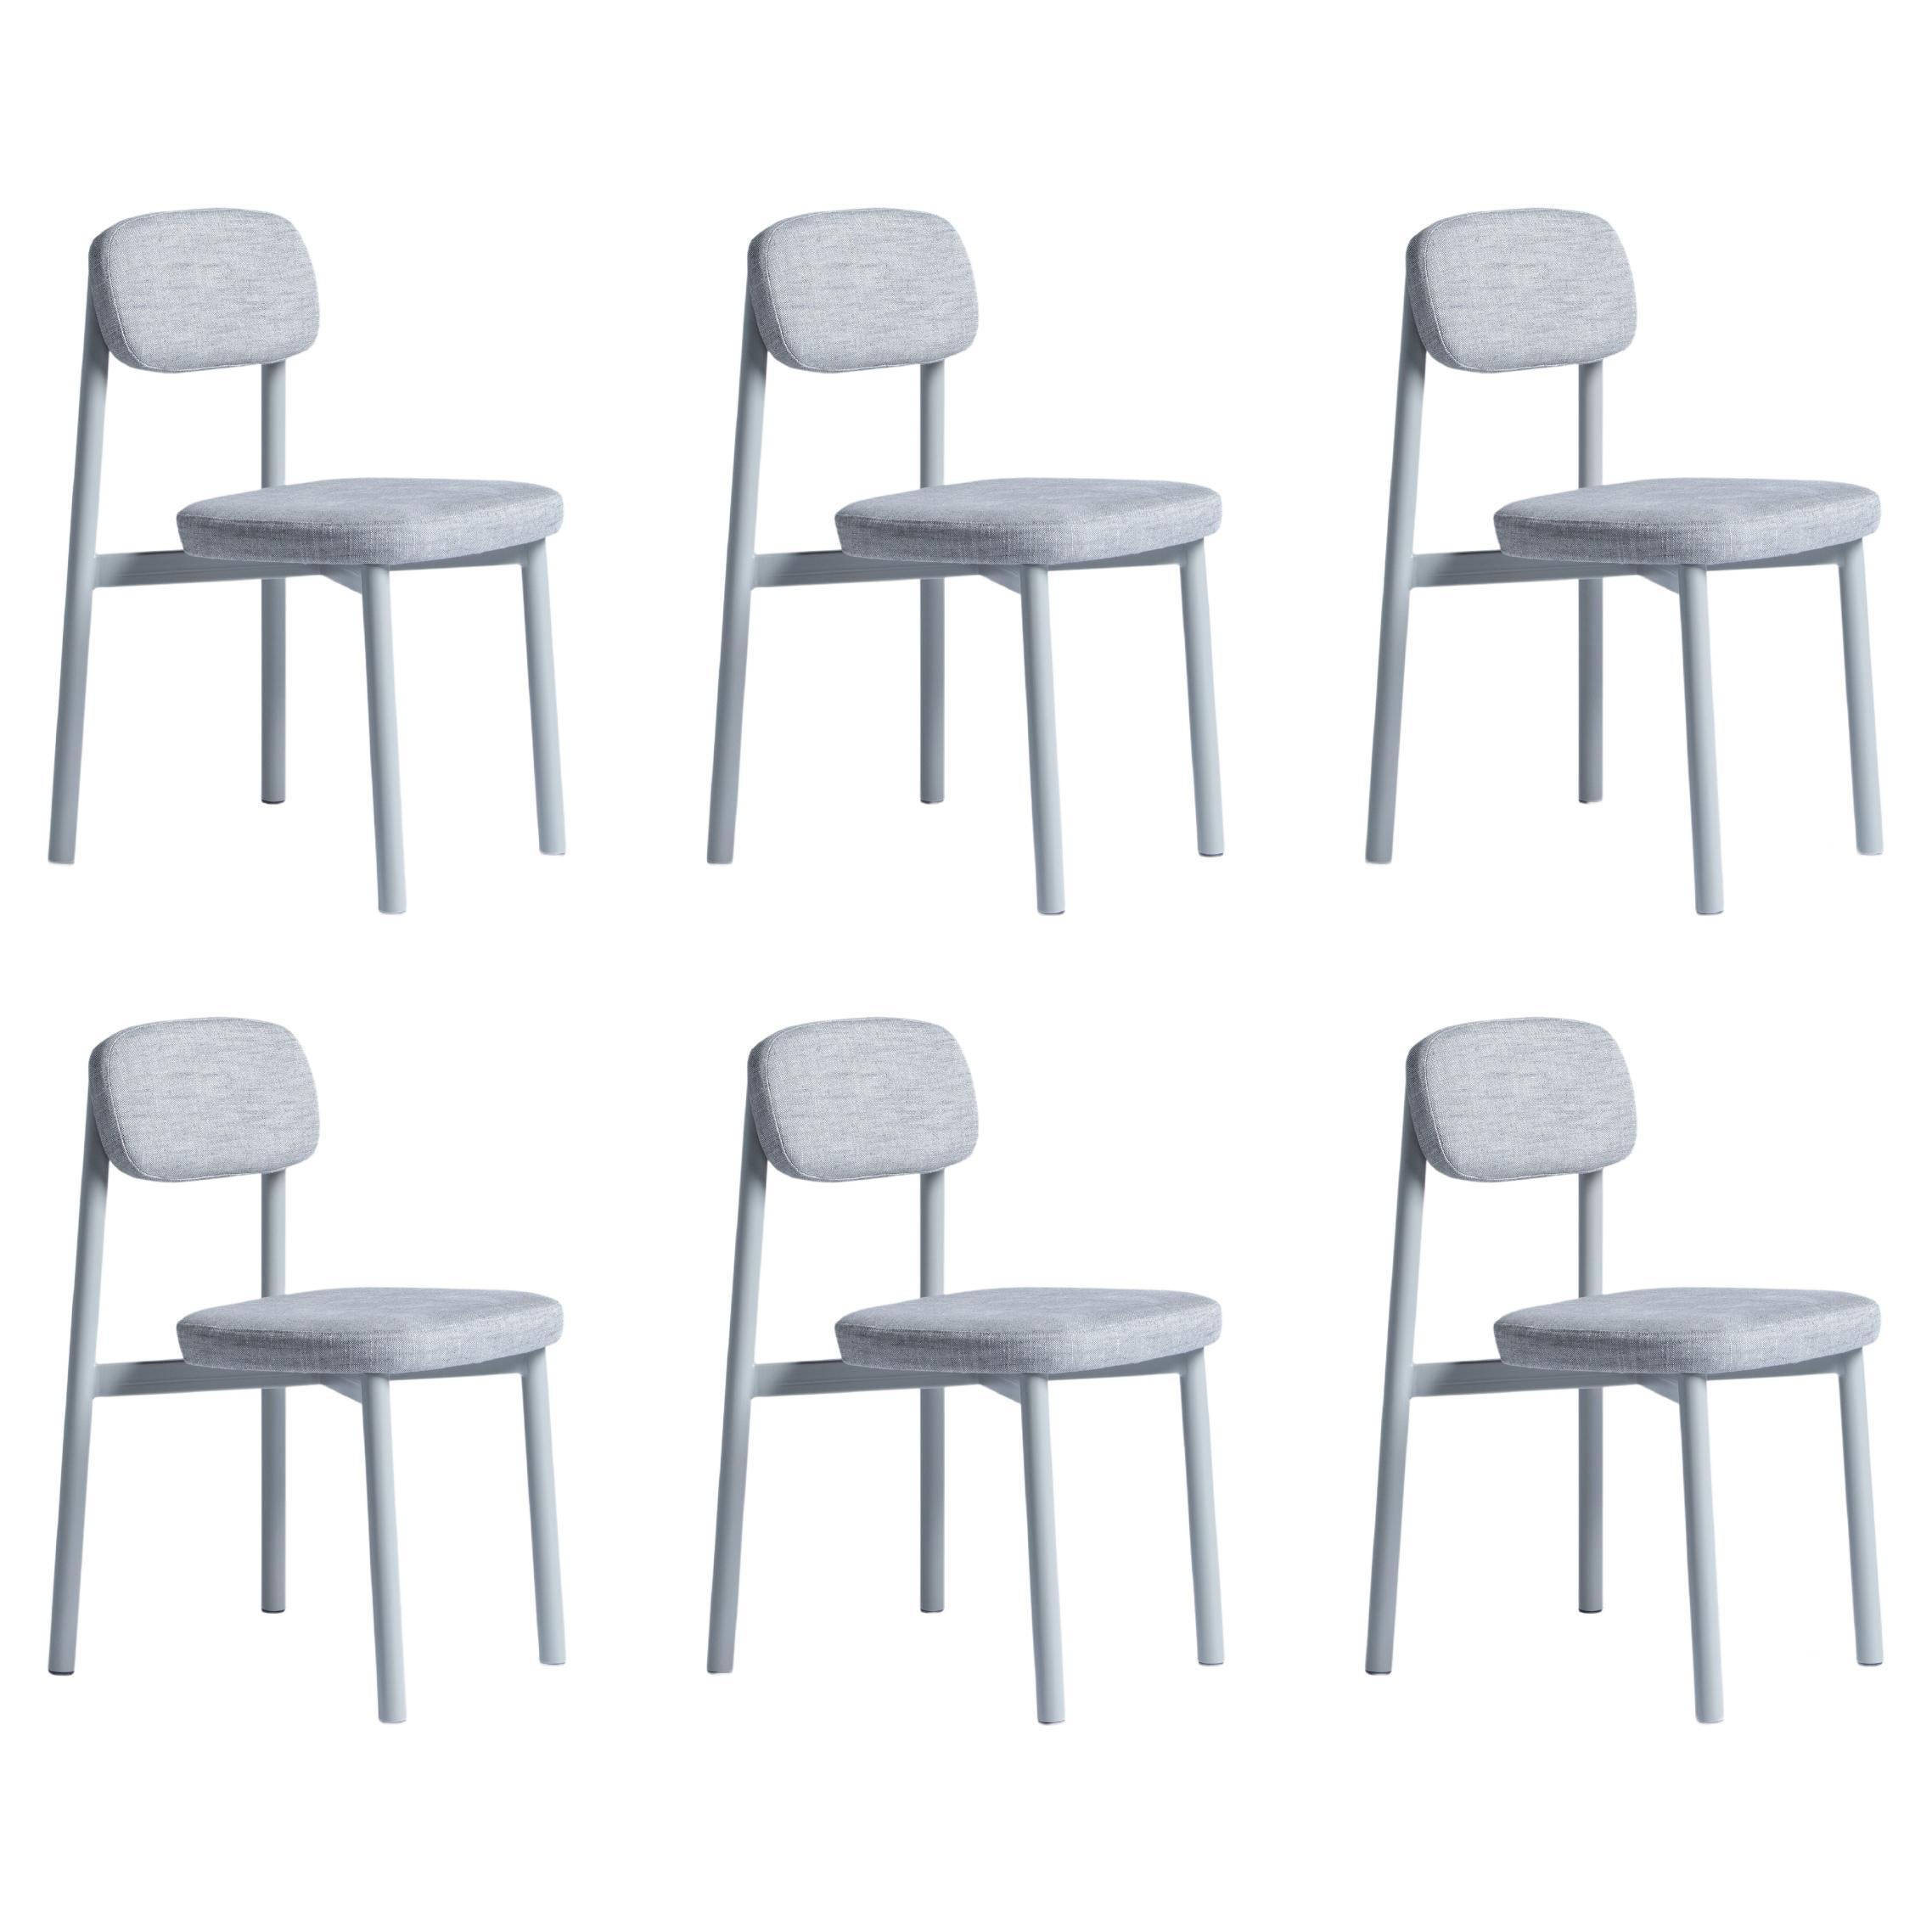 Set of 6 Grey Residence Chairs by Kann Design